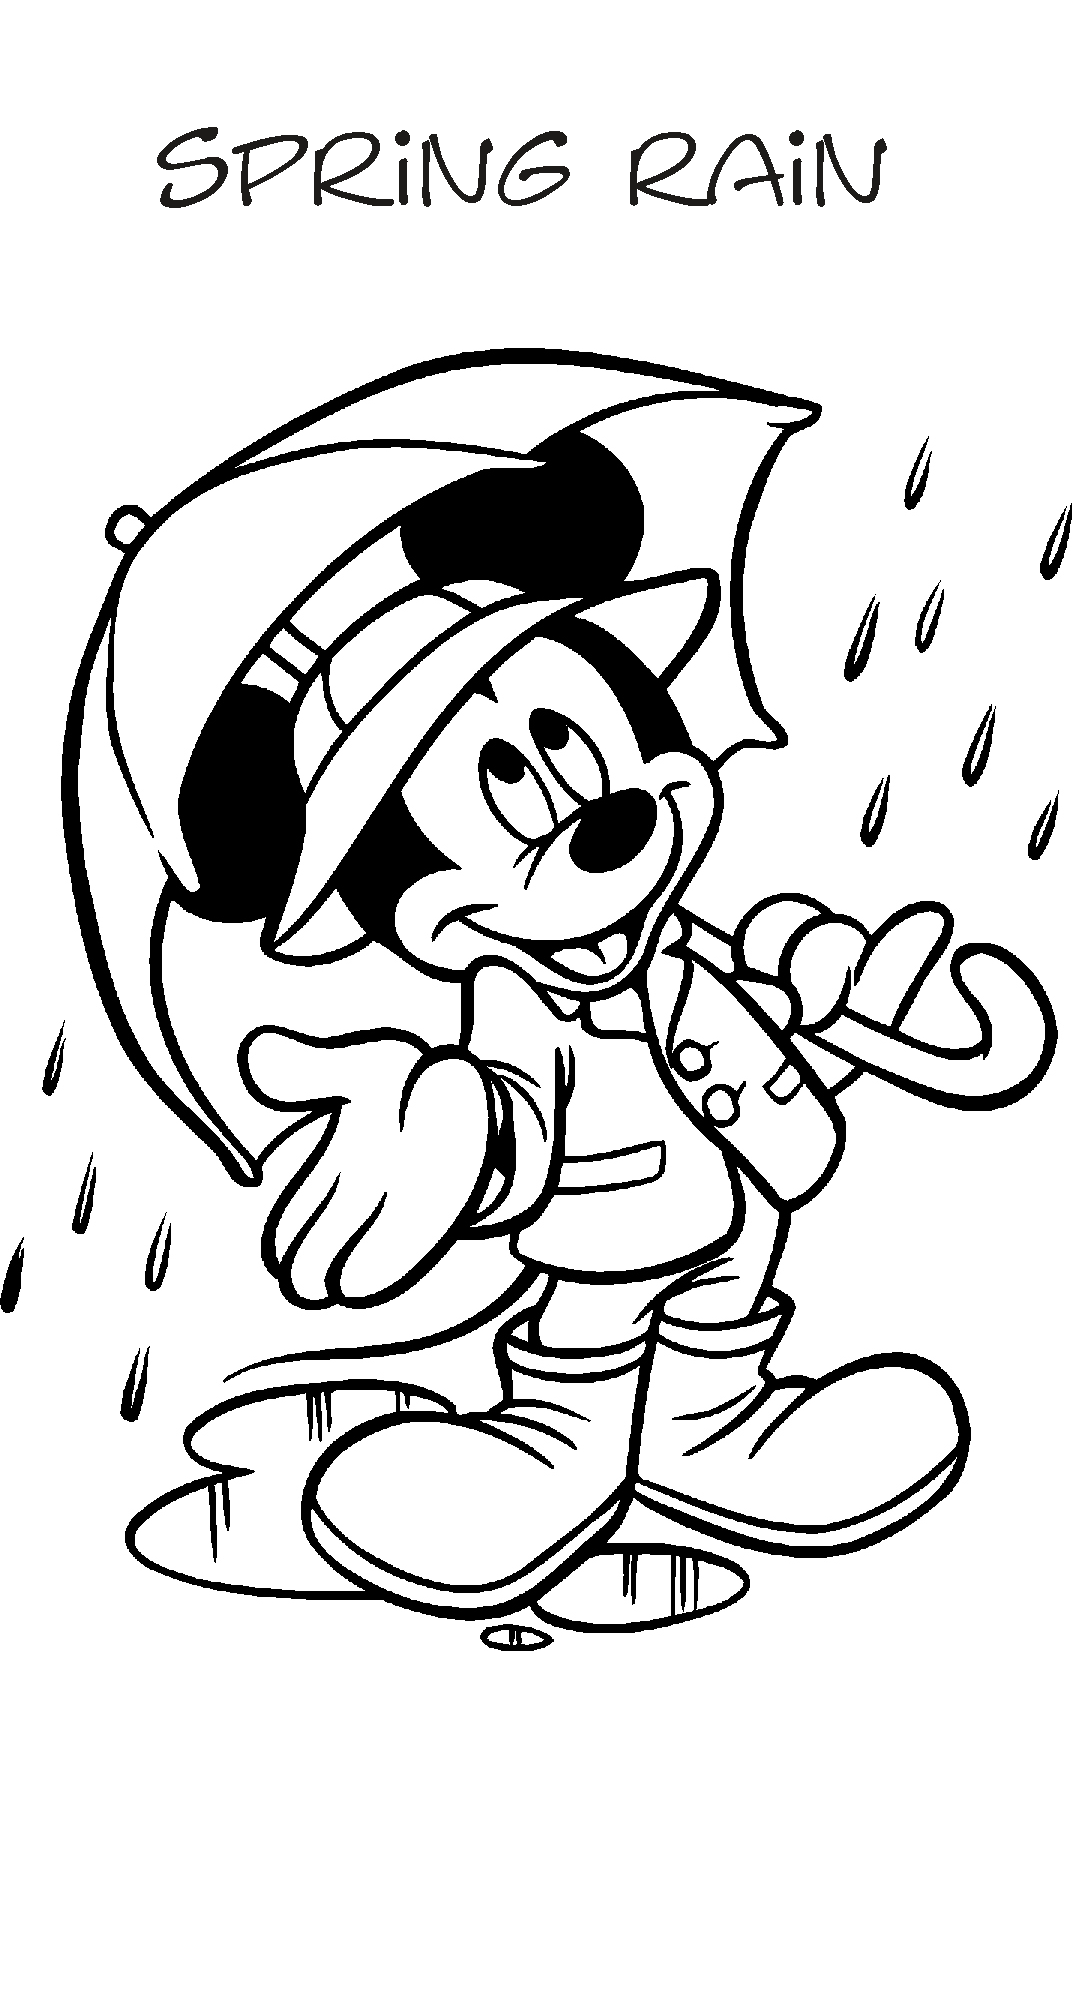 Mickey Mouse In Spring Rain Coloring Pages For Free - VoteForVerde.com